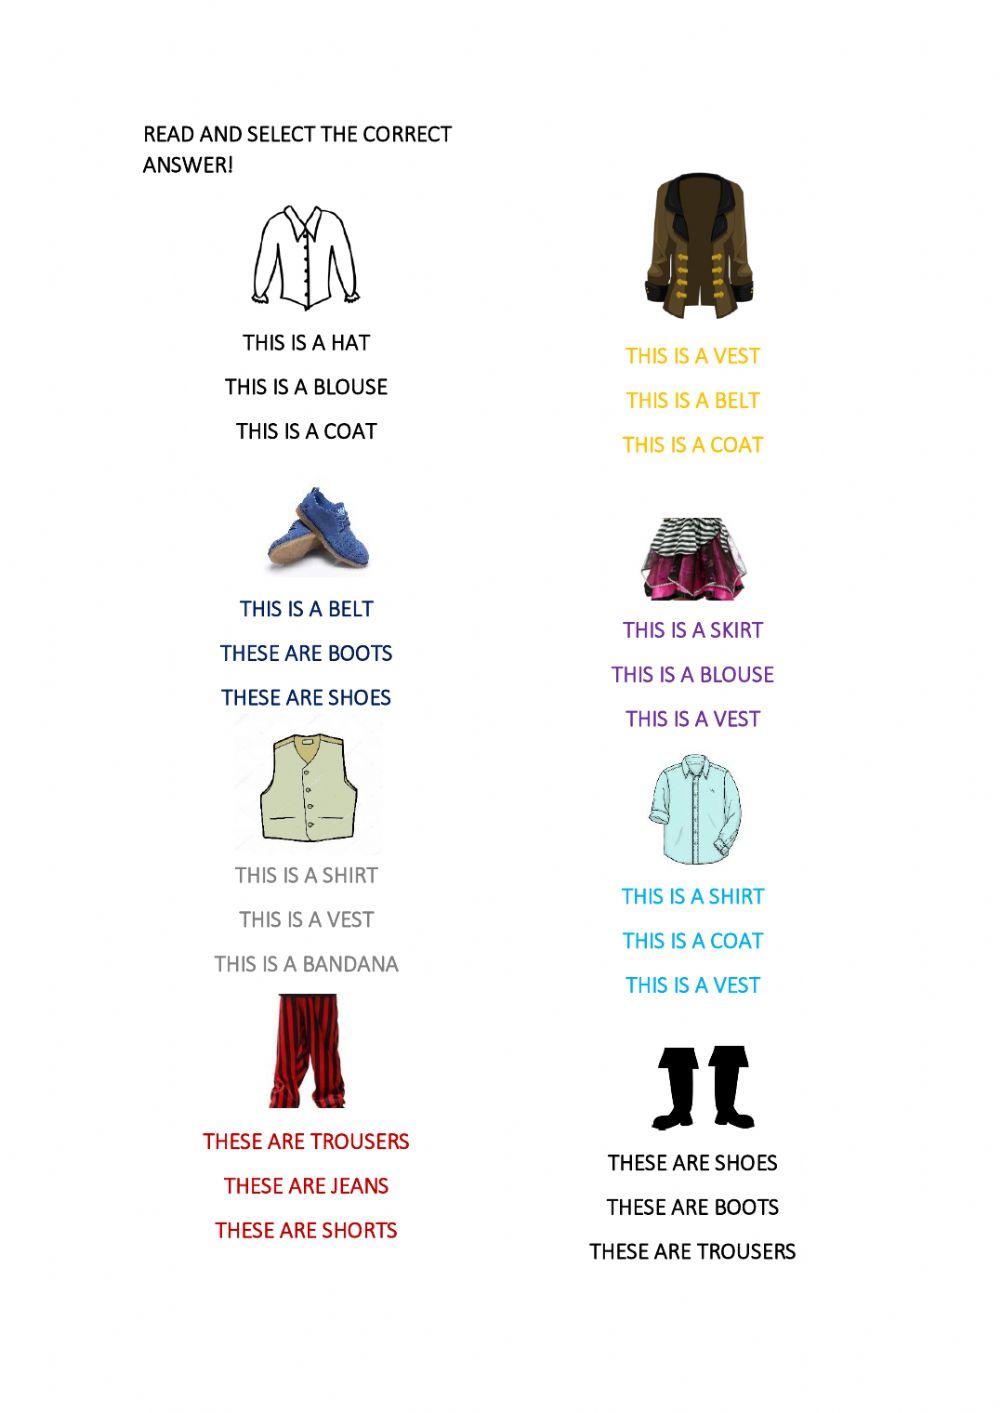 Pirates clothes read and select